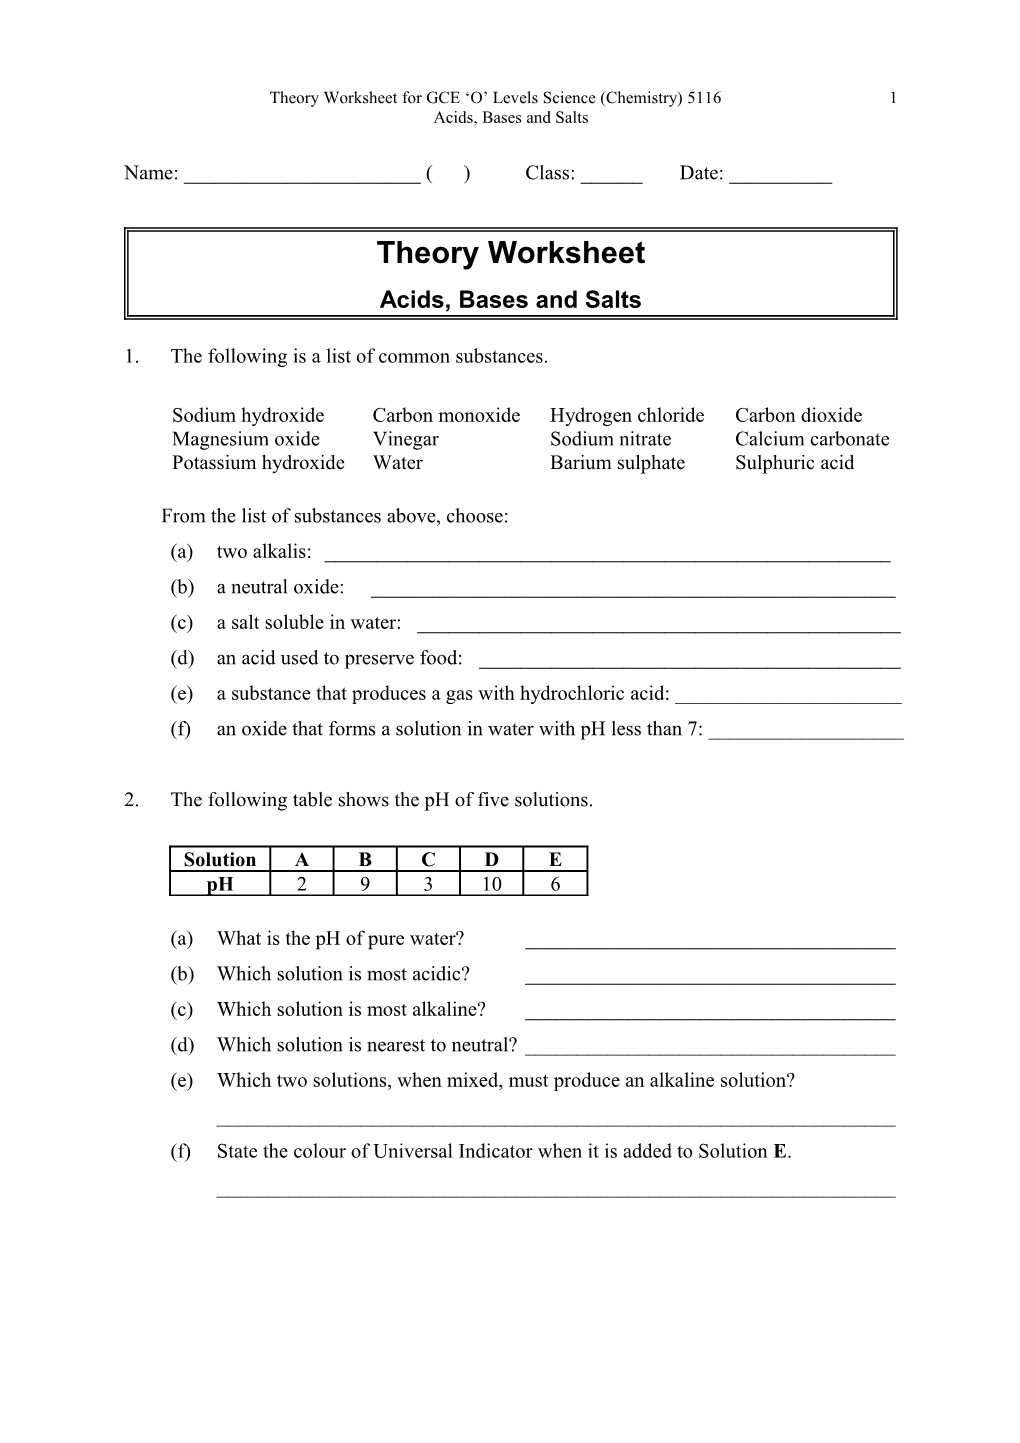 Theory Worksheet for GCE O Levels Science (Chemistry) 5116